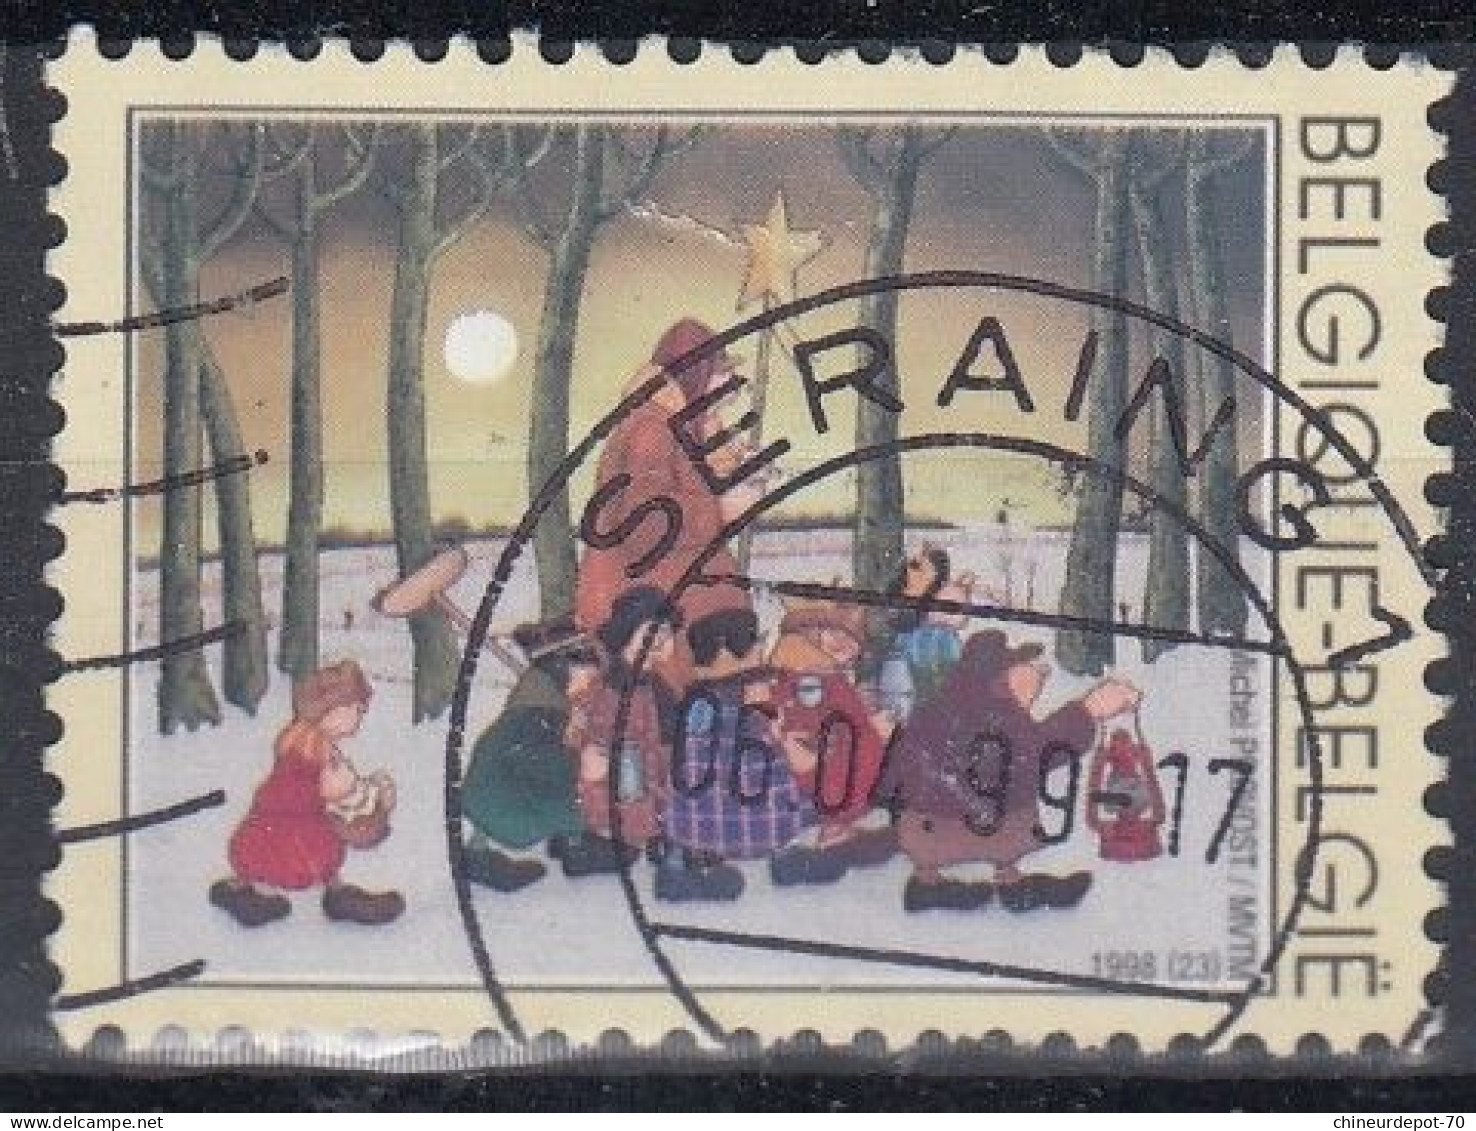 Michel PROVOST 1998 CACHET Seraing - Used Stamps